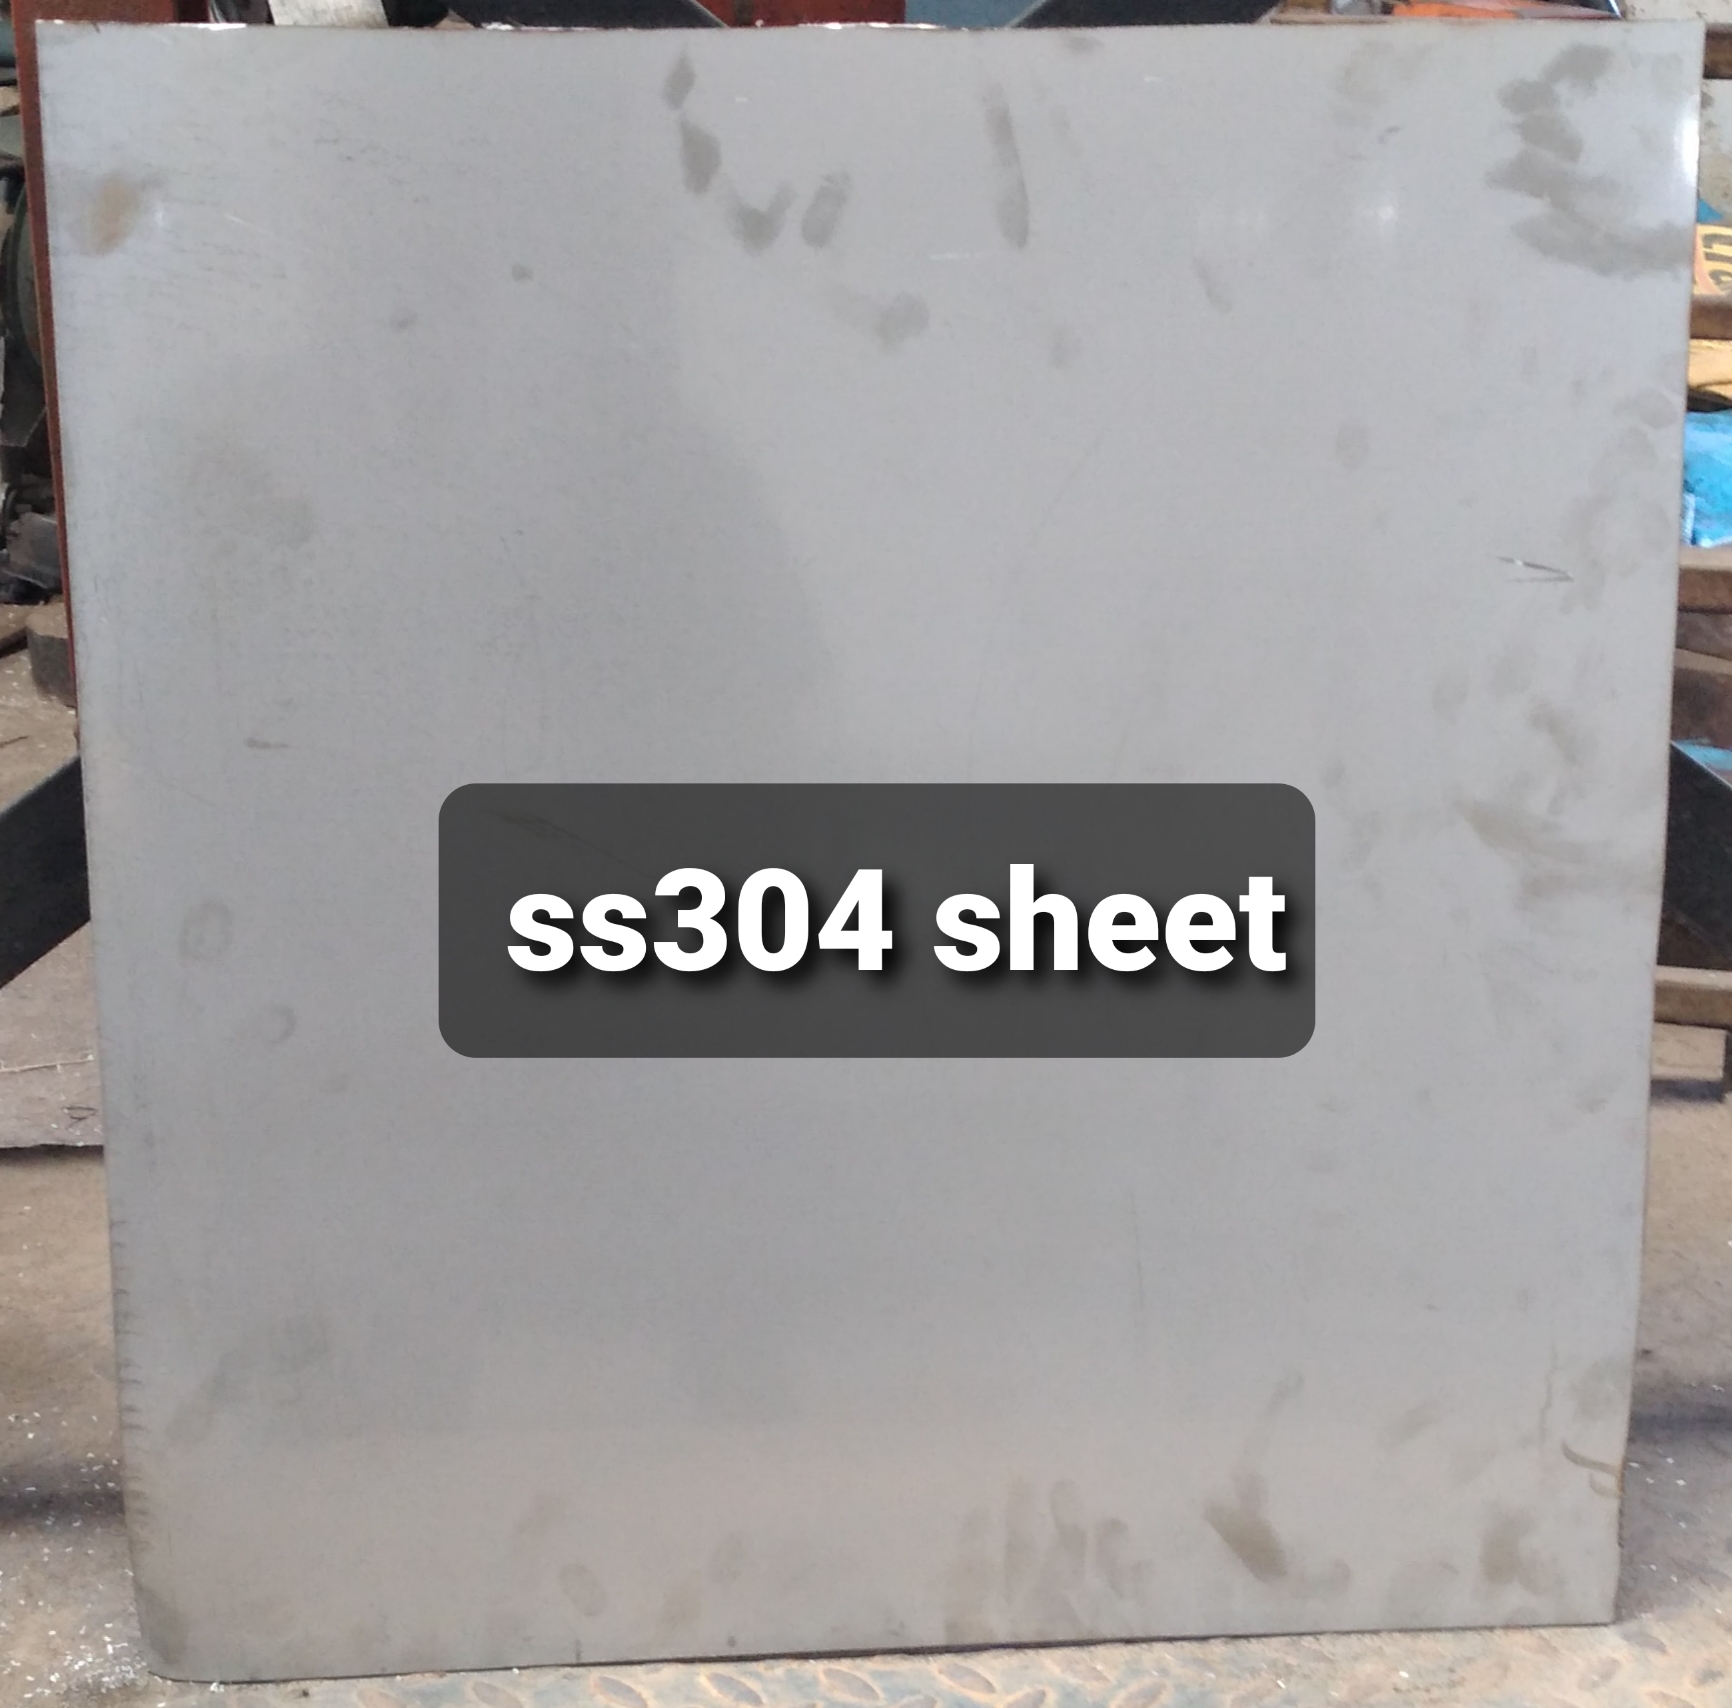 Stainless Steel SS304 Sheet Image